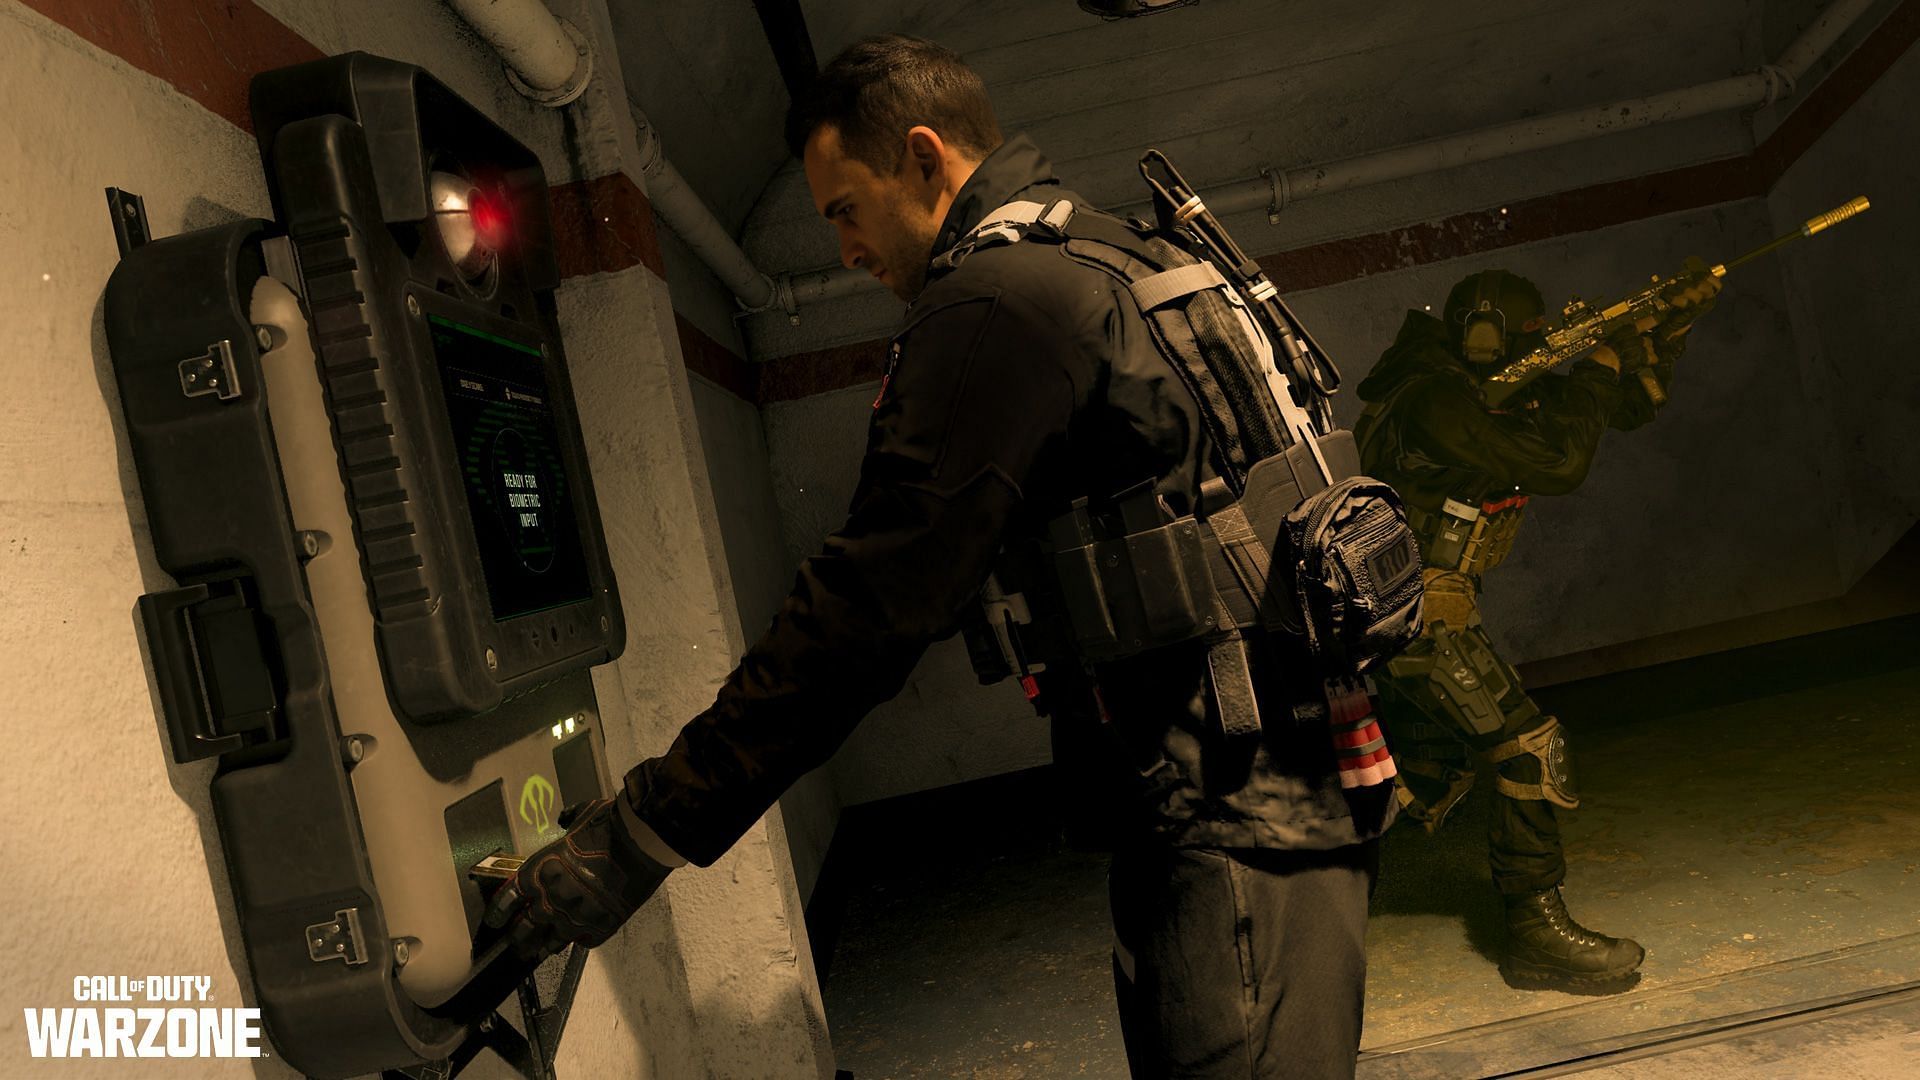 An Operator in Warzone interacting with a scanner